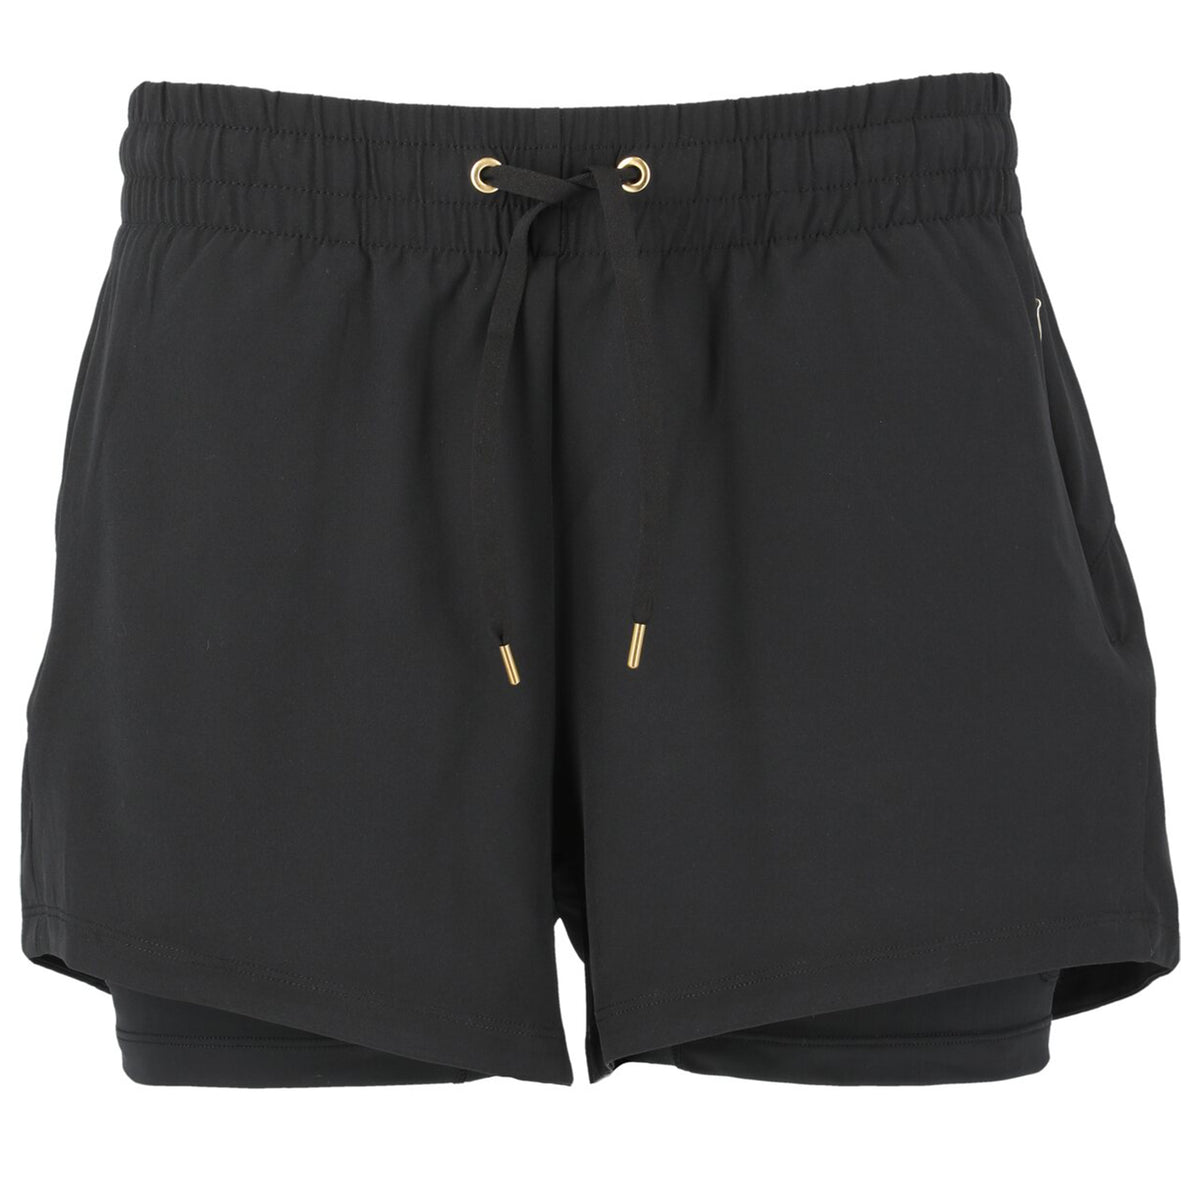 Athlecia Timmie Womens 2in1 Shorts:Black